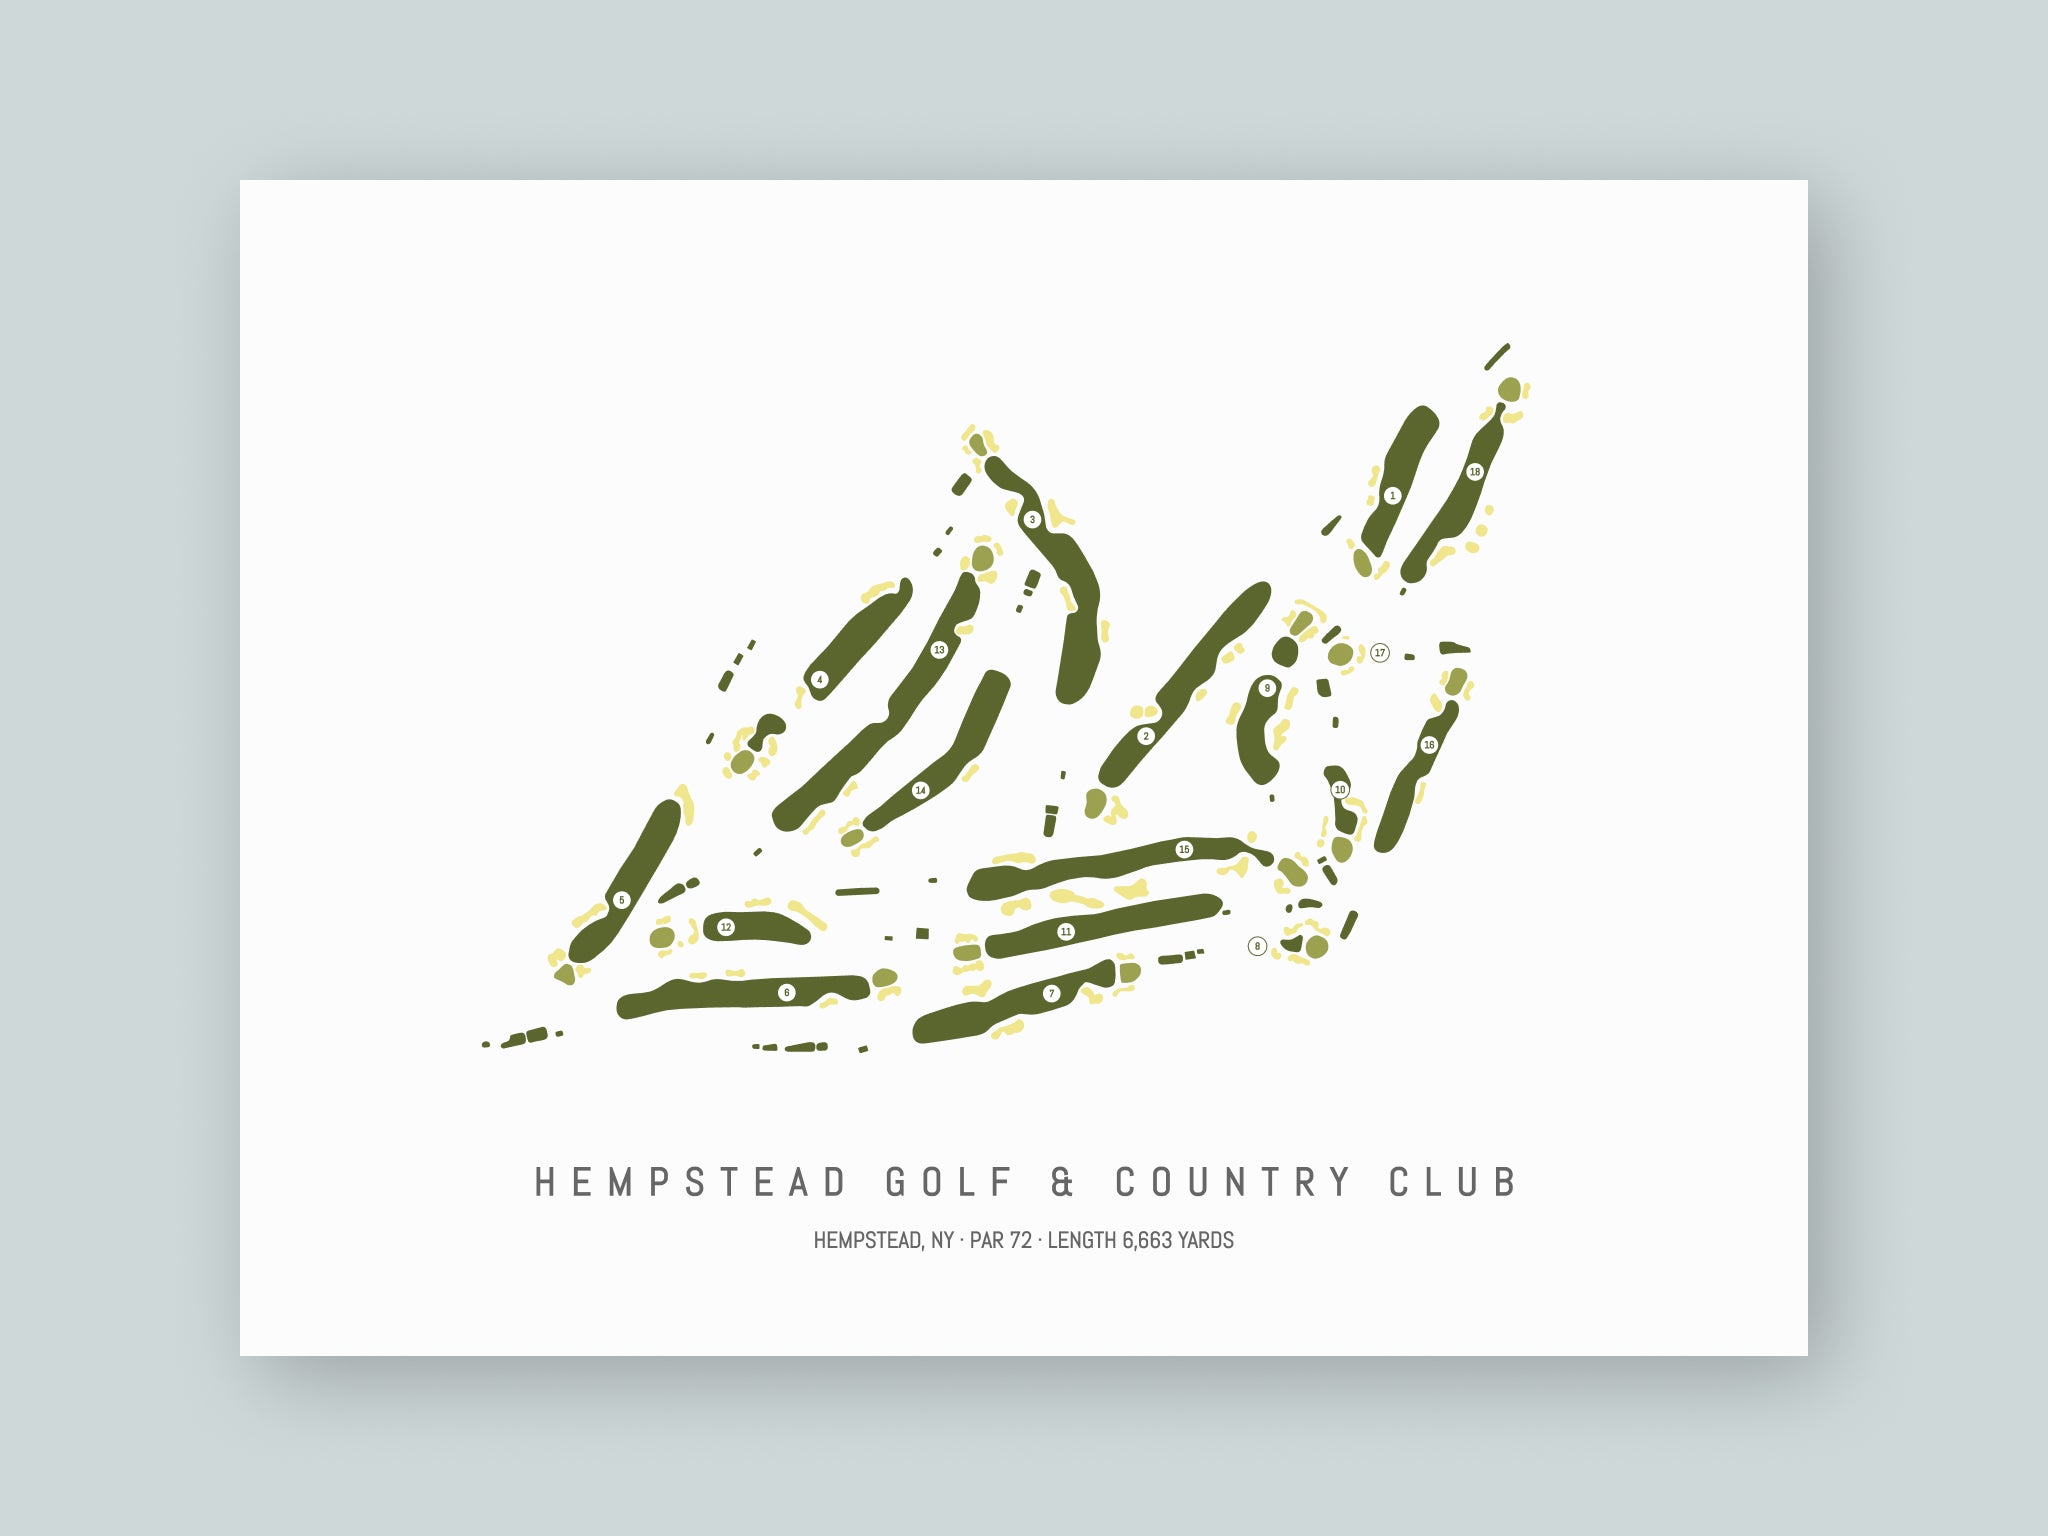 Hempstead-Golf-And-Country-Club-NY--Unframed-24x18-With-Hole-Numbers